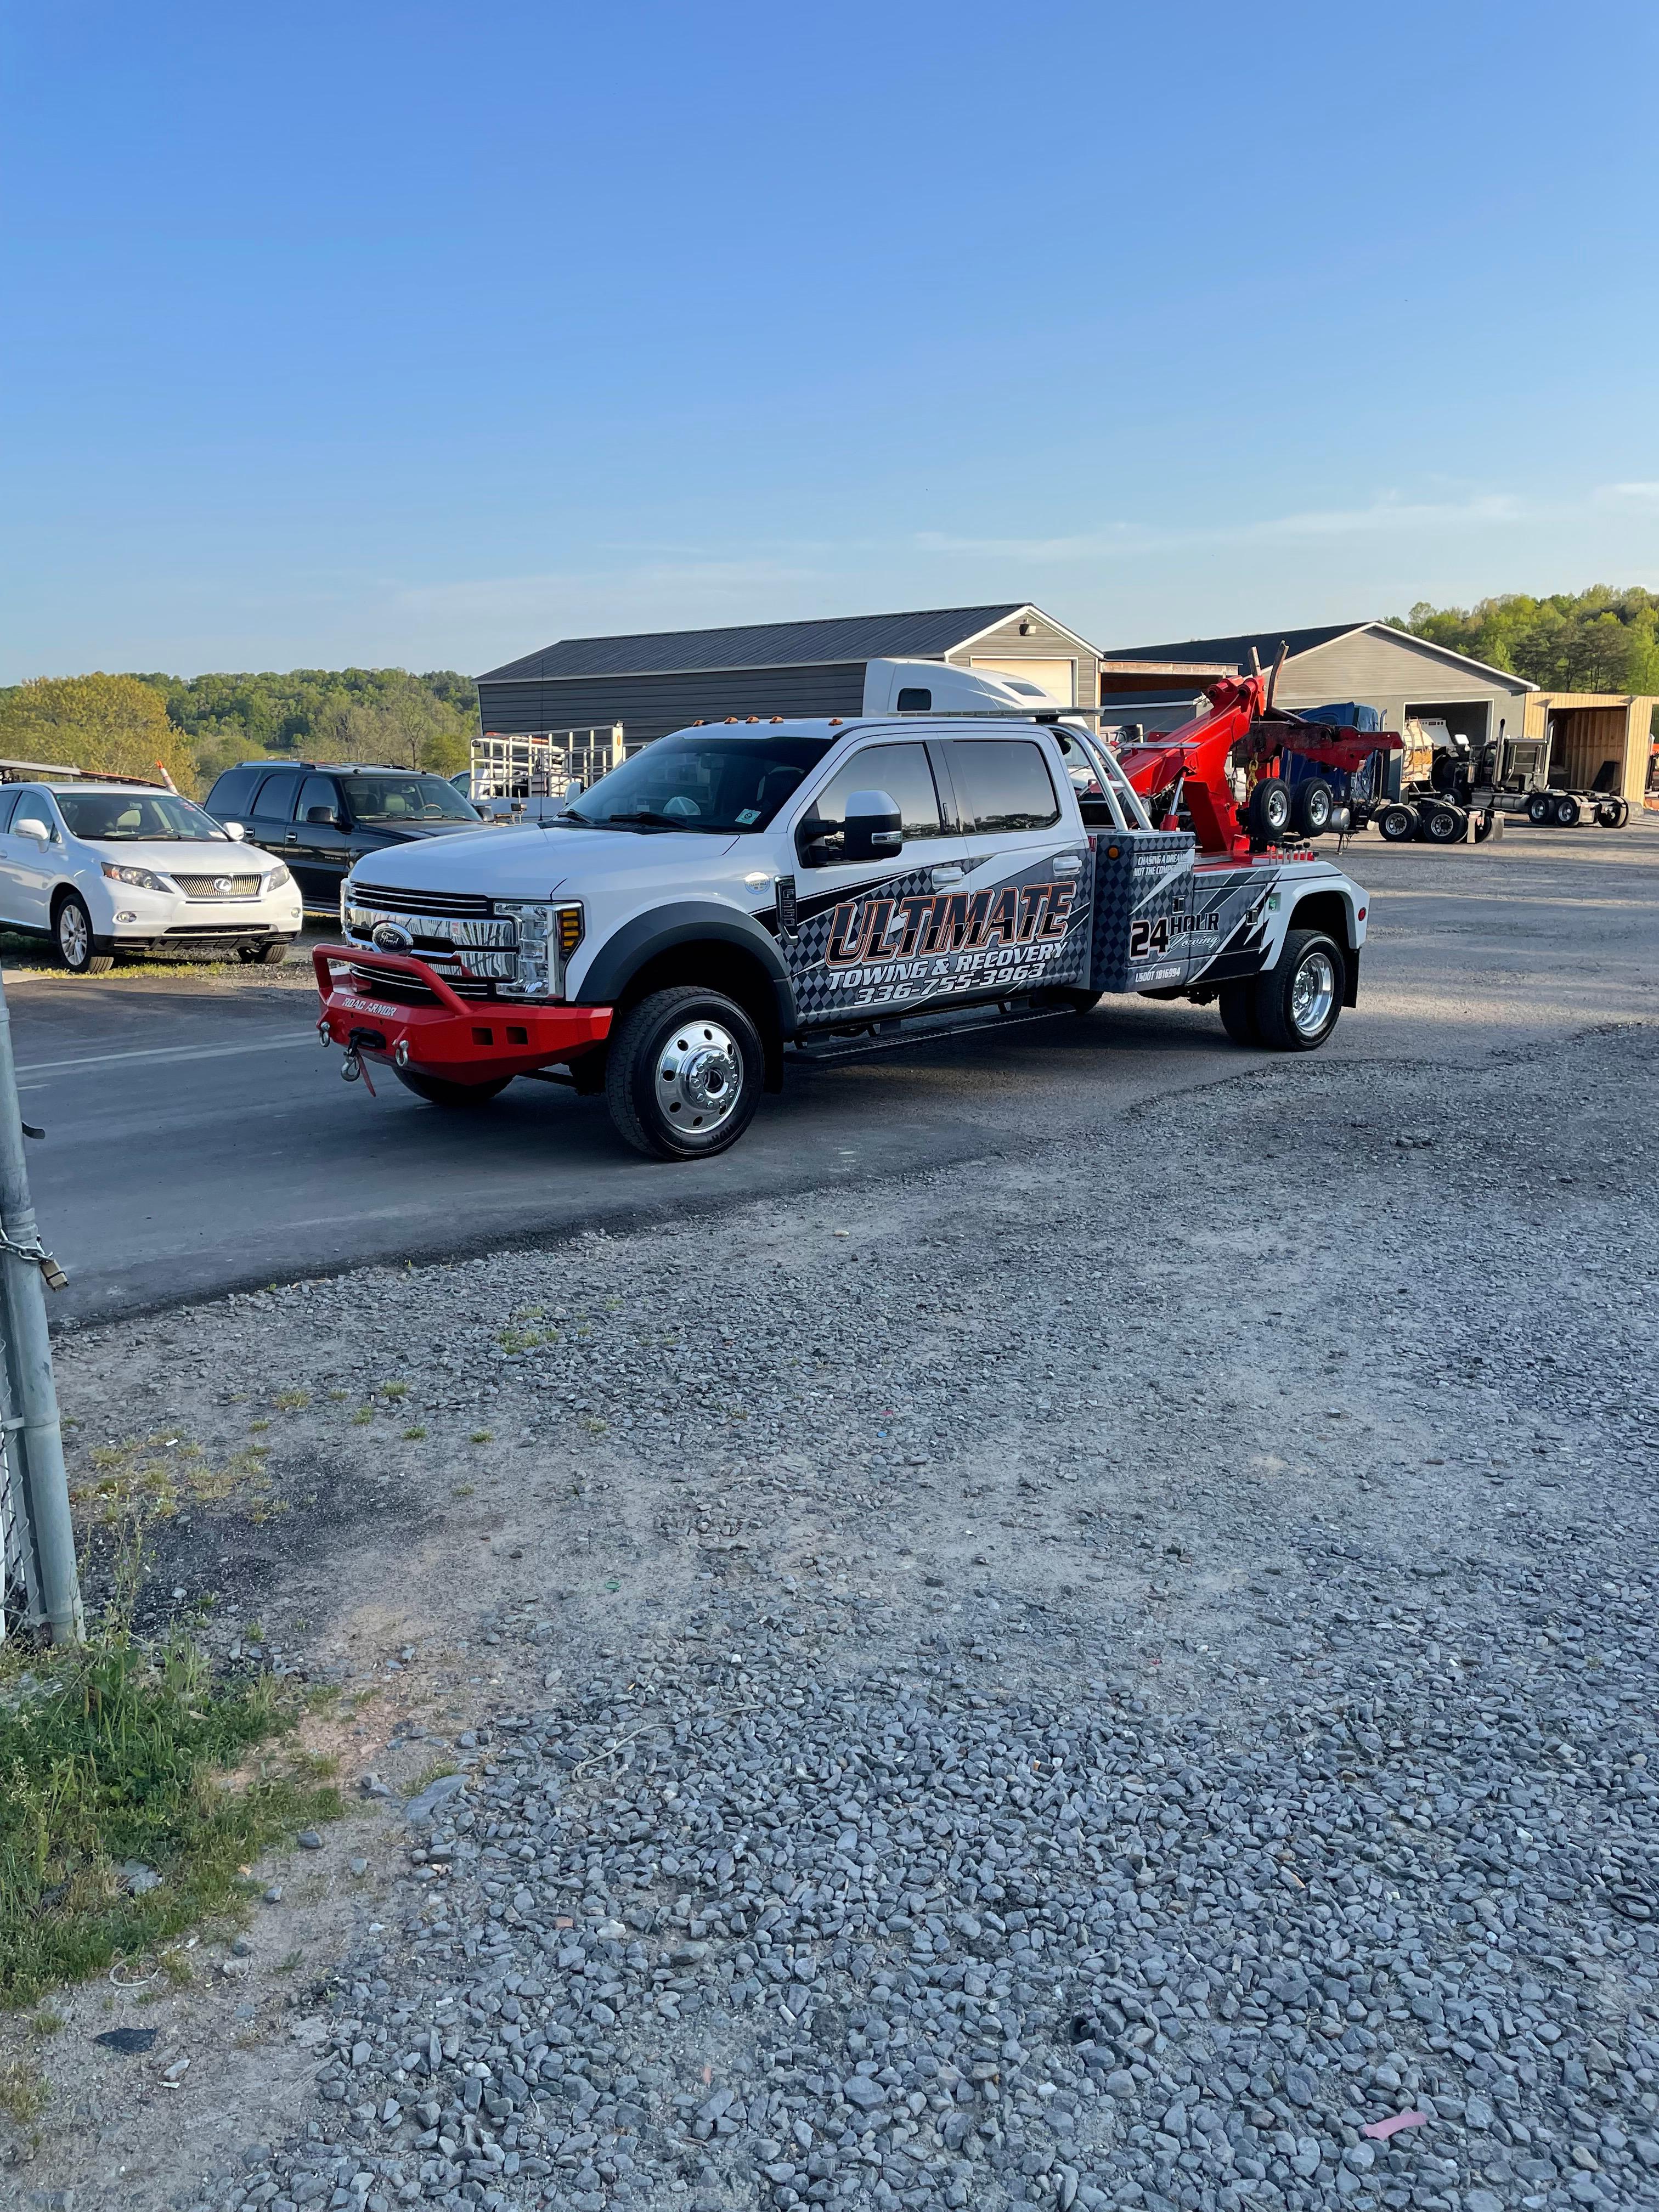 Call now for a towing service you can count on!